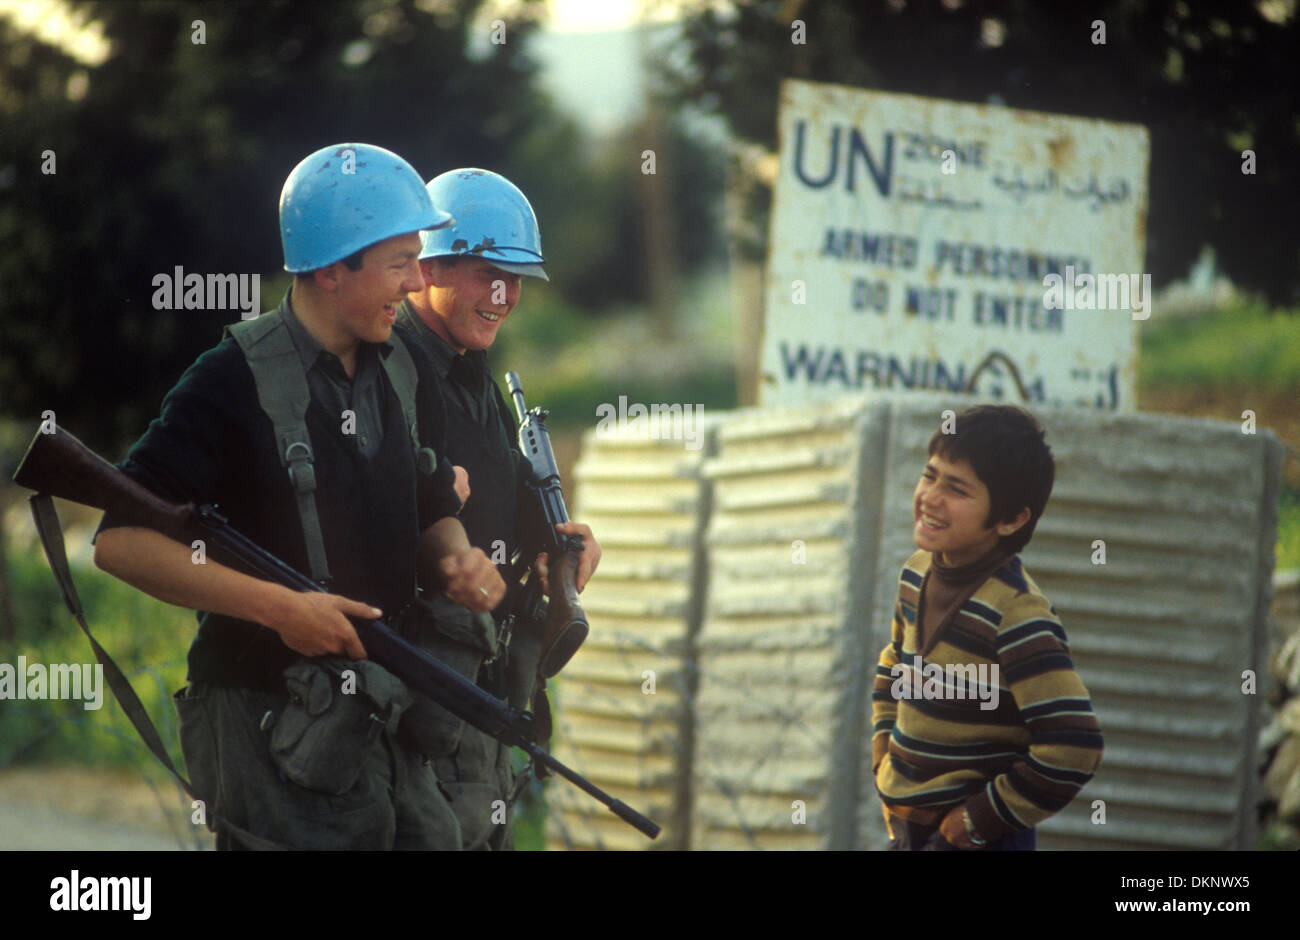 United Nations troops southern Lebanon 1980. UN 46th Irish Battalion wearing traditional blue helmets, two troops sharing a joke with a young Lebanese boy. 1980s HOMER SYKES Stock Photo